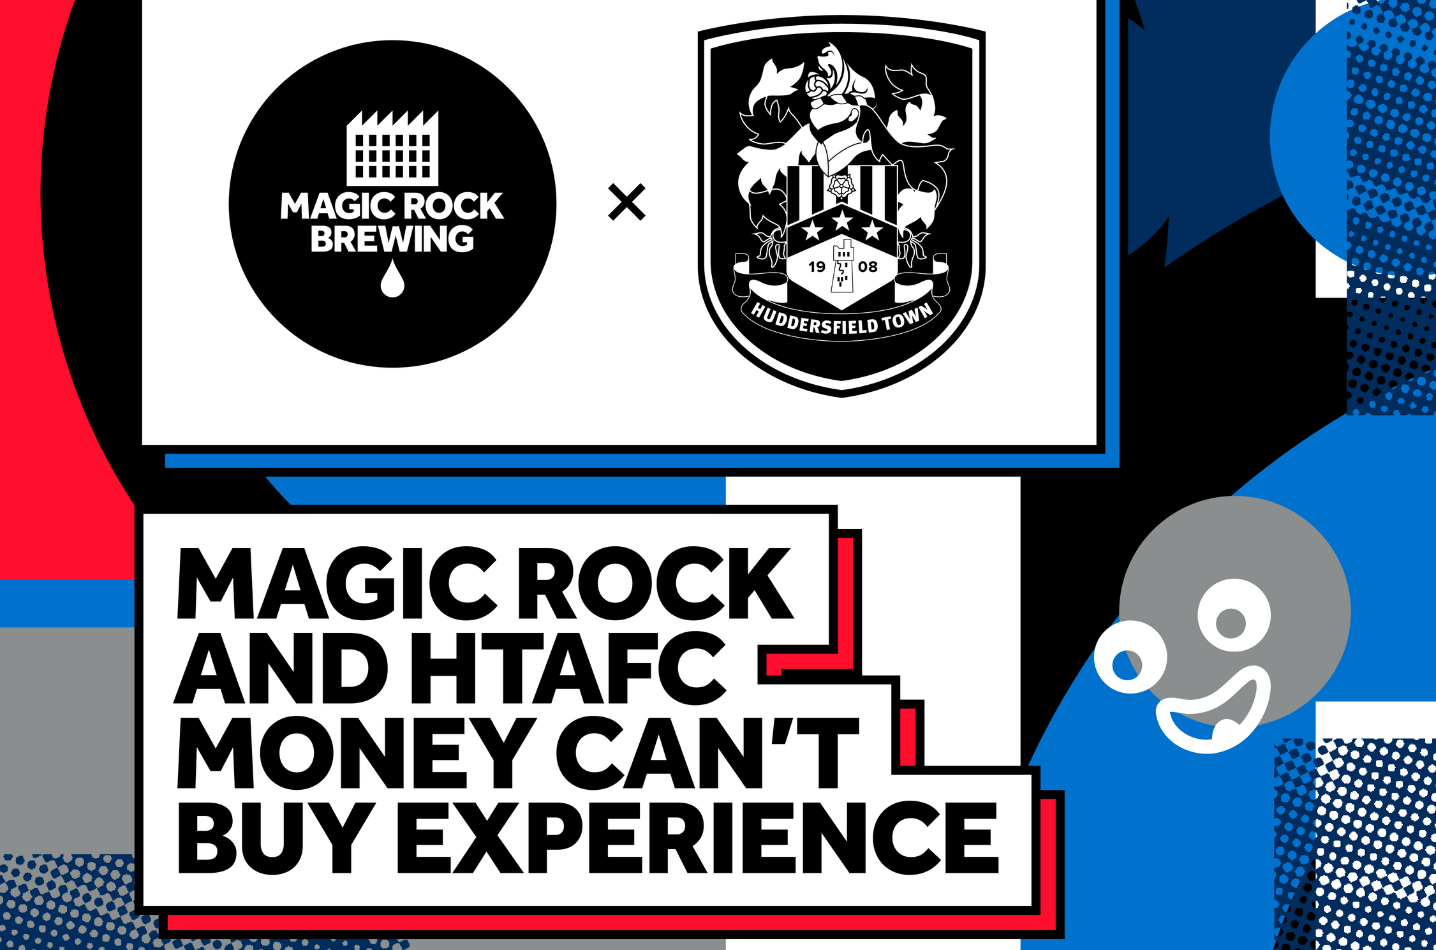 Magic Rock x HTAFC - Money Can't Buy Experience - Terms & Conditions